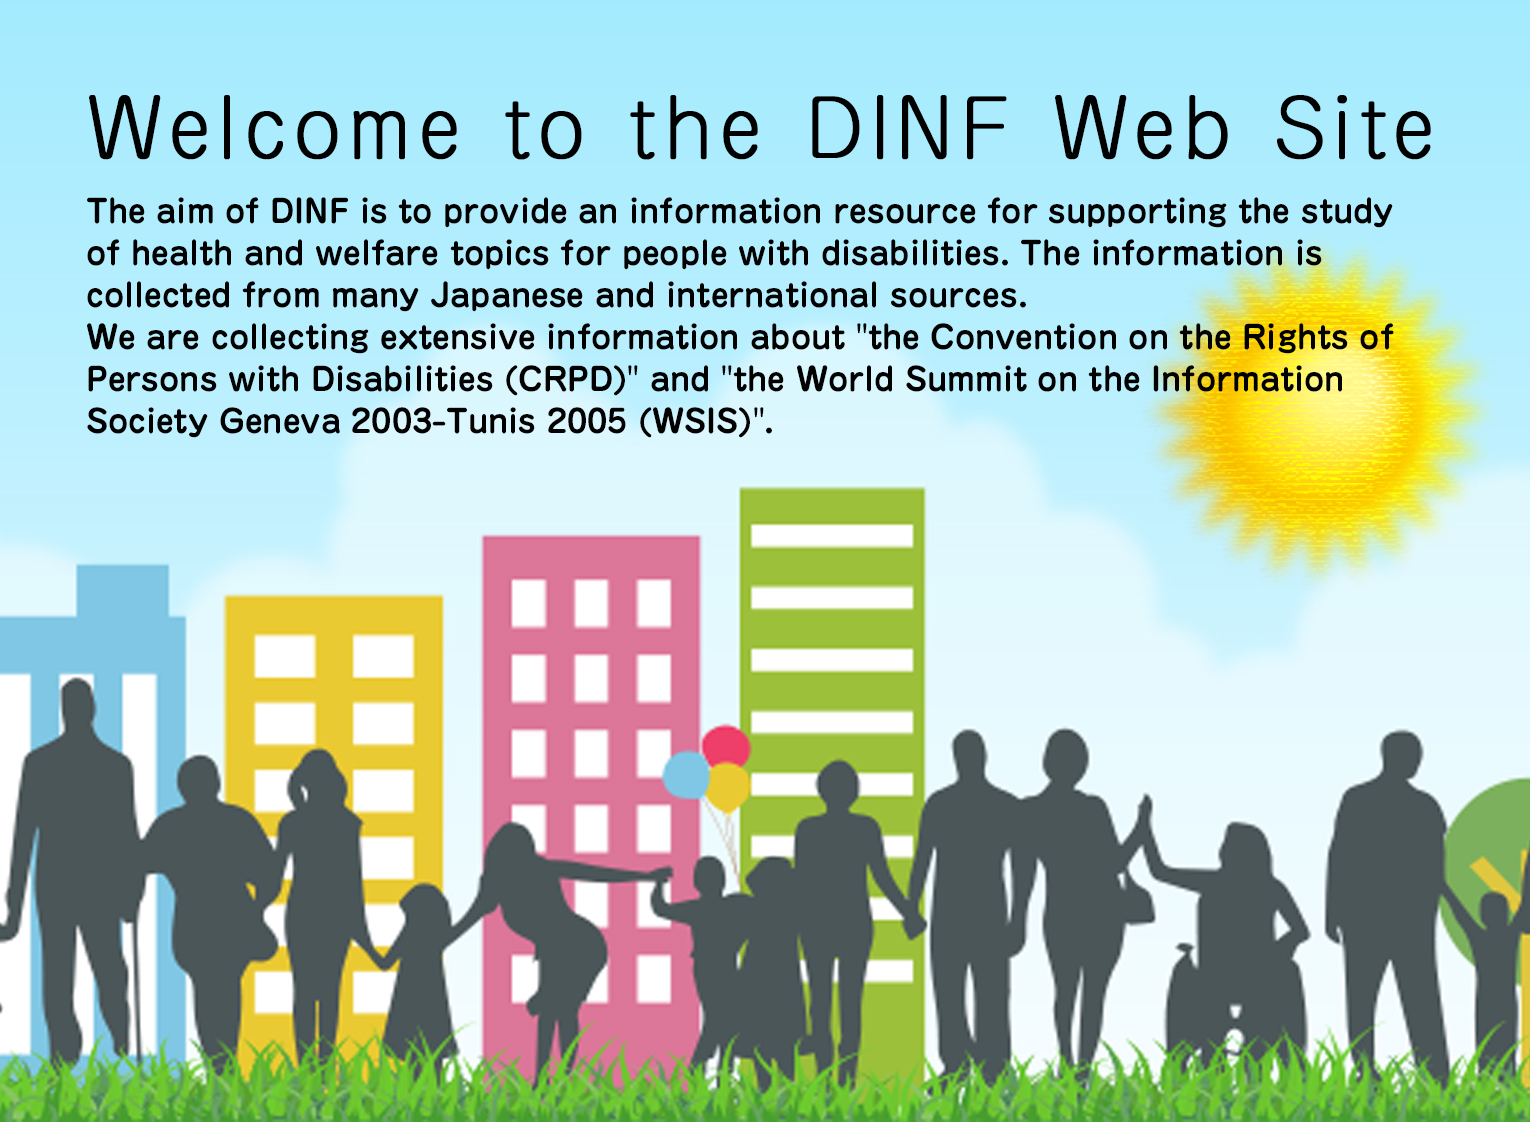 Welcome to the DINF Web Site.The aim of DINF is to provide an information resource for supporting the study of health and welfare topics for people with disabilities. The information is collected from many Japanese and international sources.We are collecting extensive information about the Convention on the Rights of Persons with Disabilities (CRPD) and the World Summit on the Information Society Geneva 2003-Tunis 2005 (WSIS).